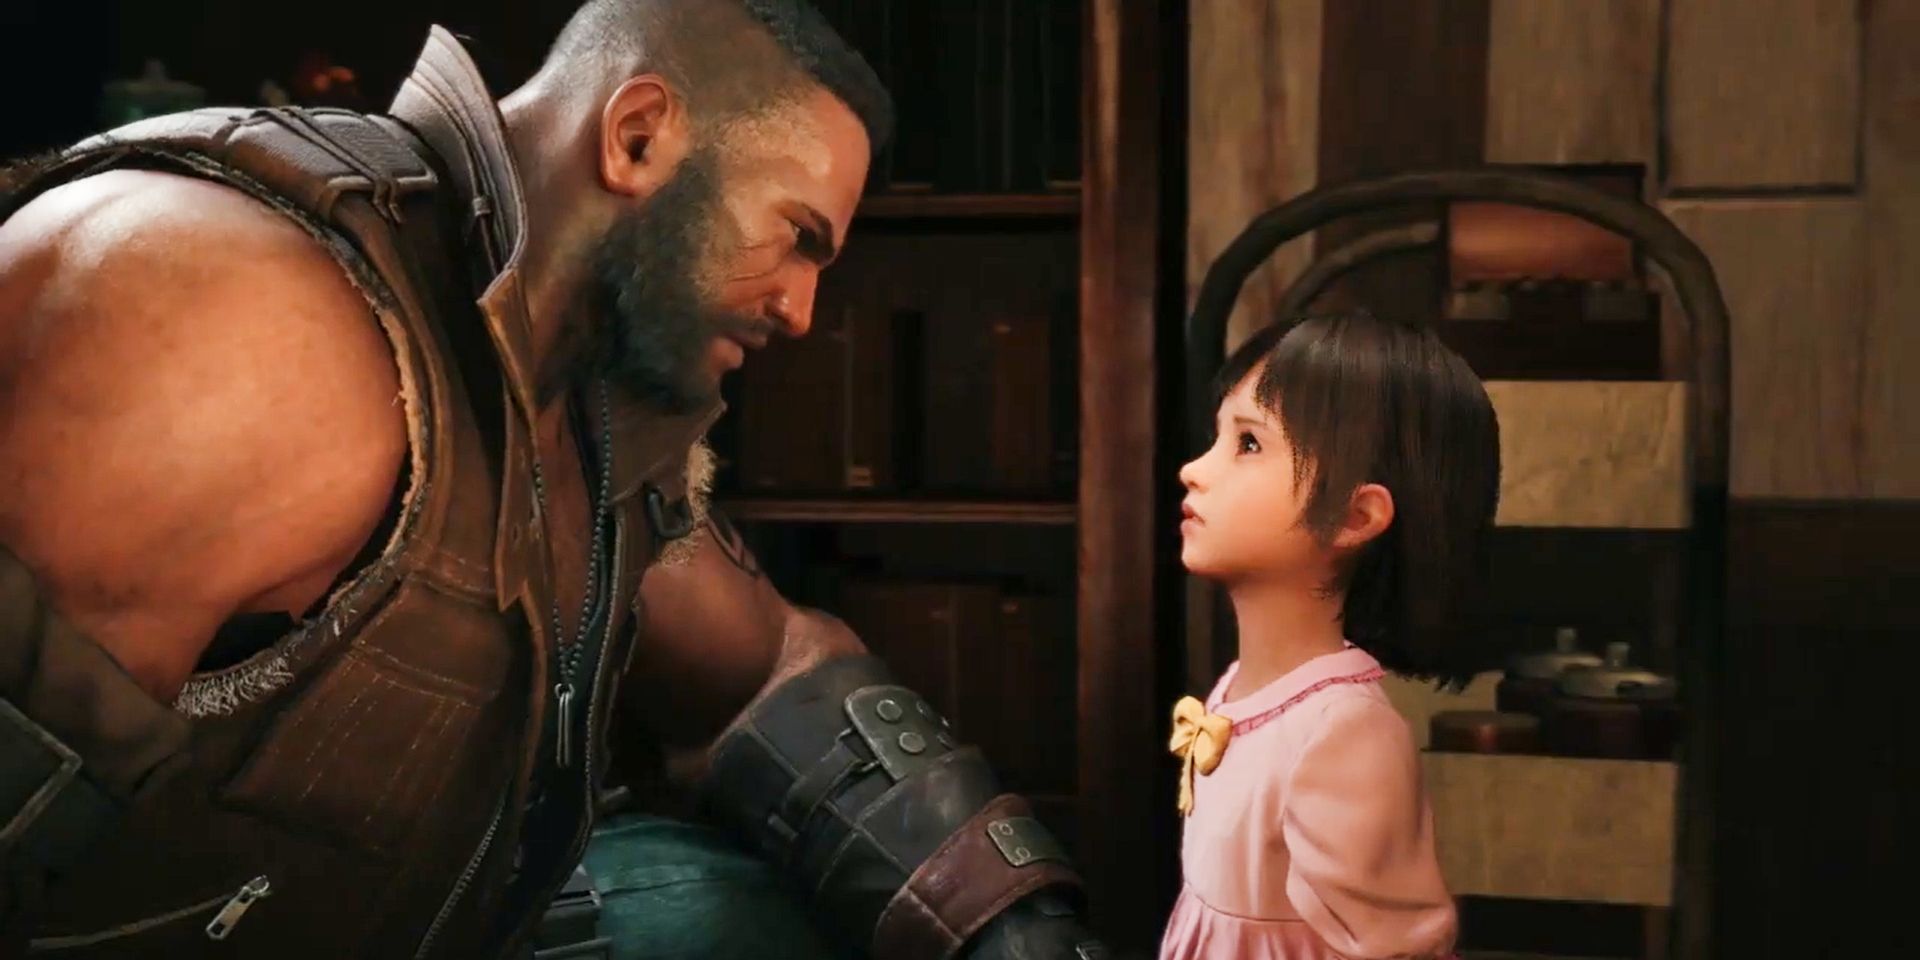 Barret leaning over to talk to Marlene in the Final Fantasy 7